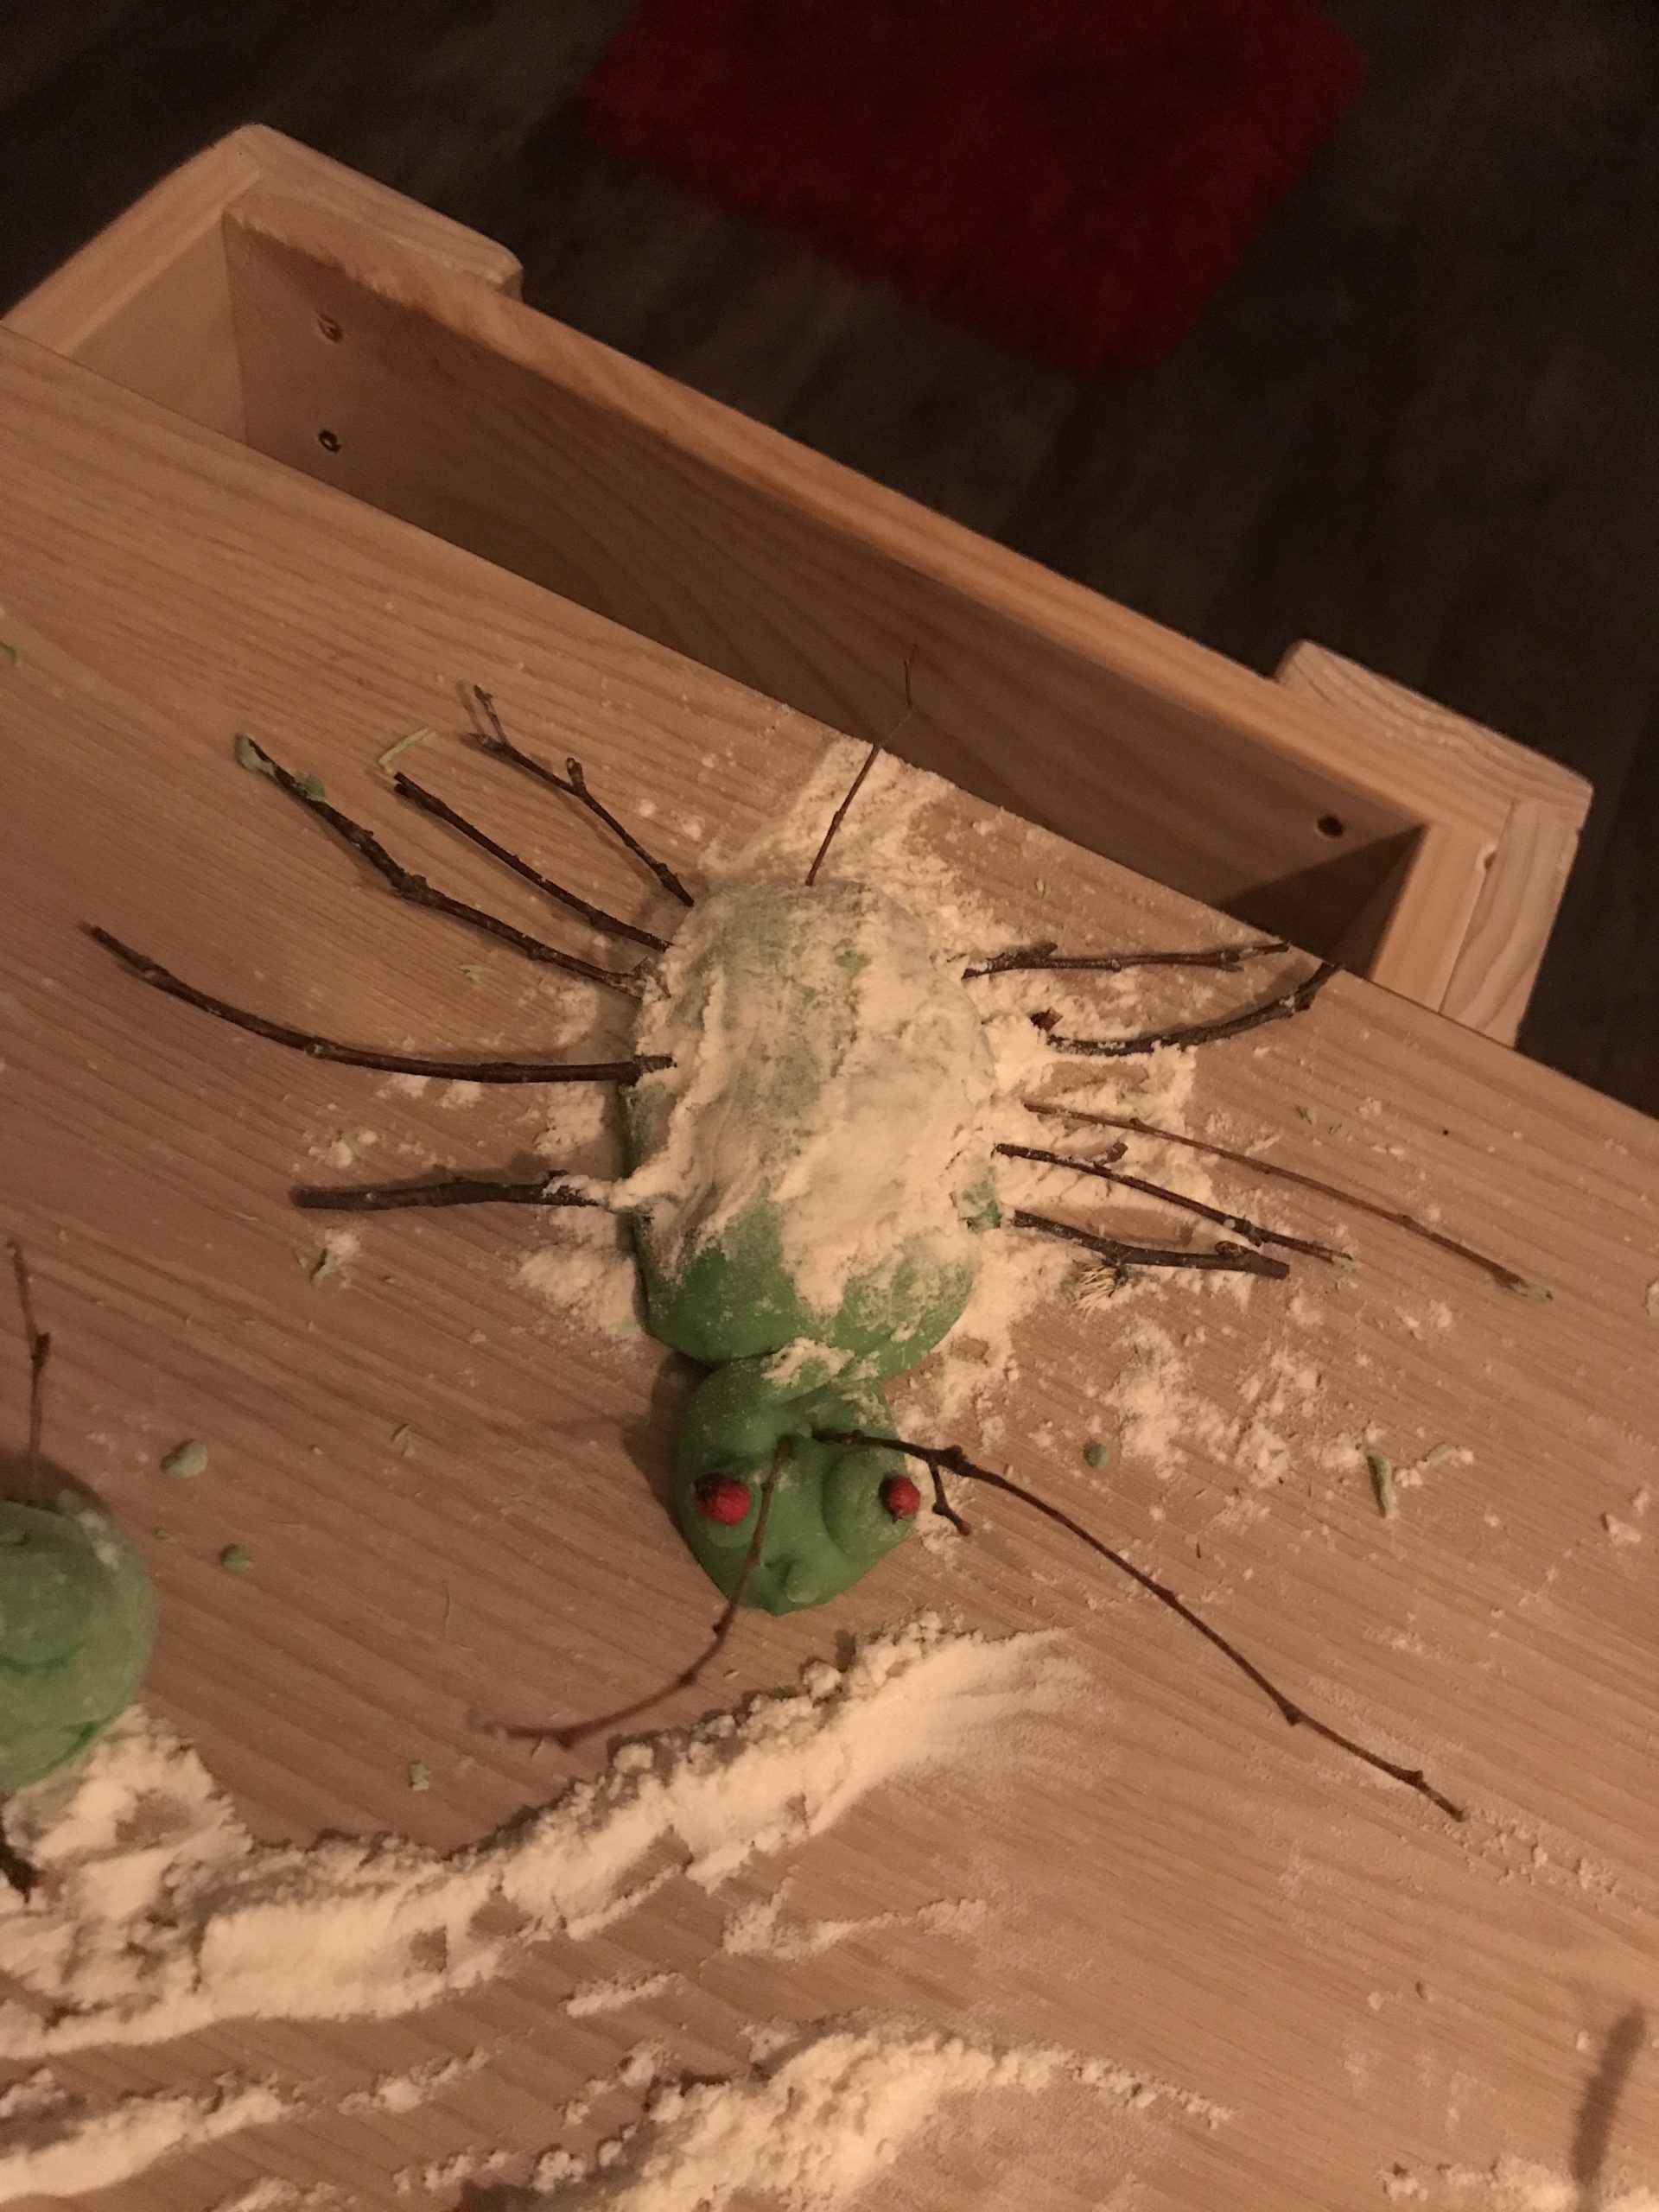 Lockdown playdough insects